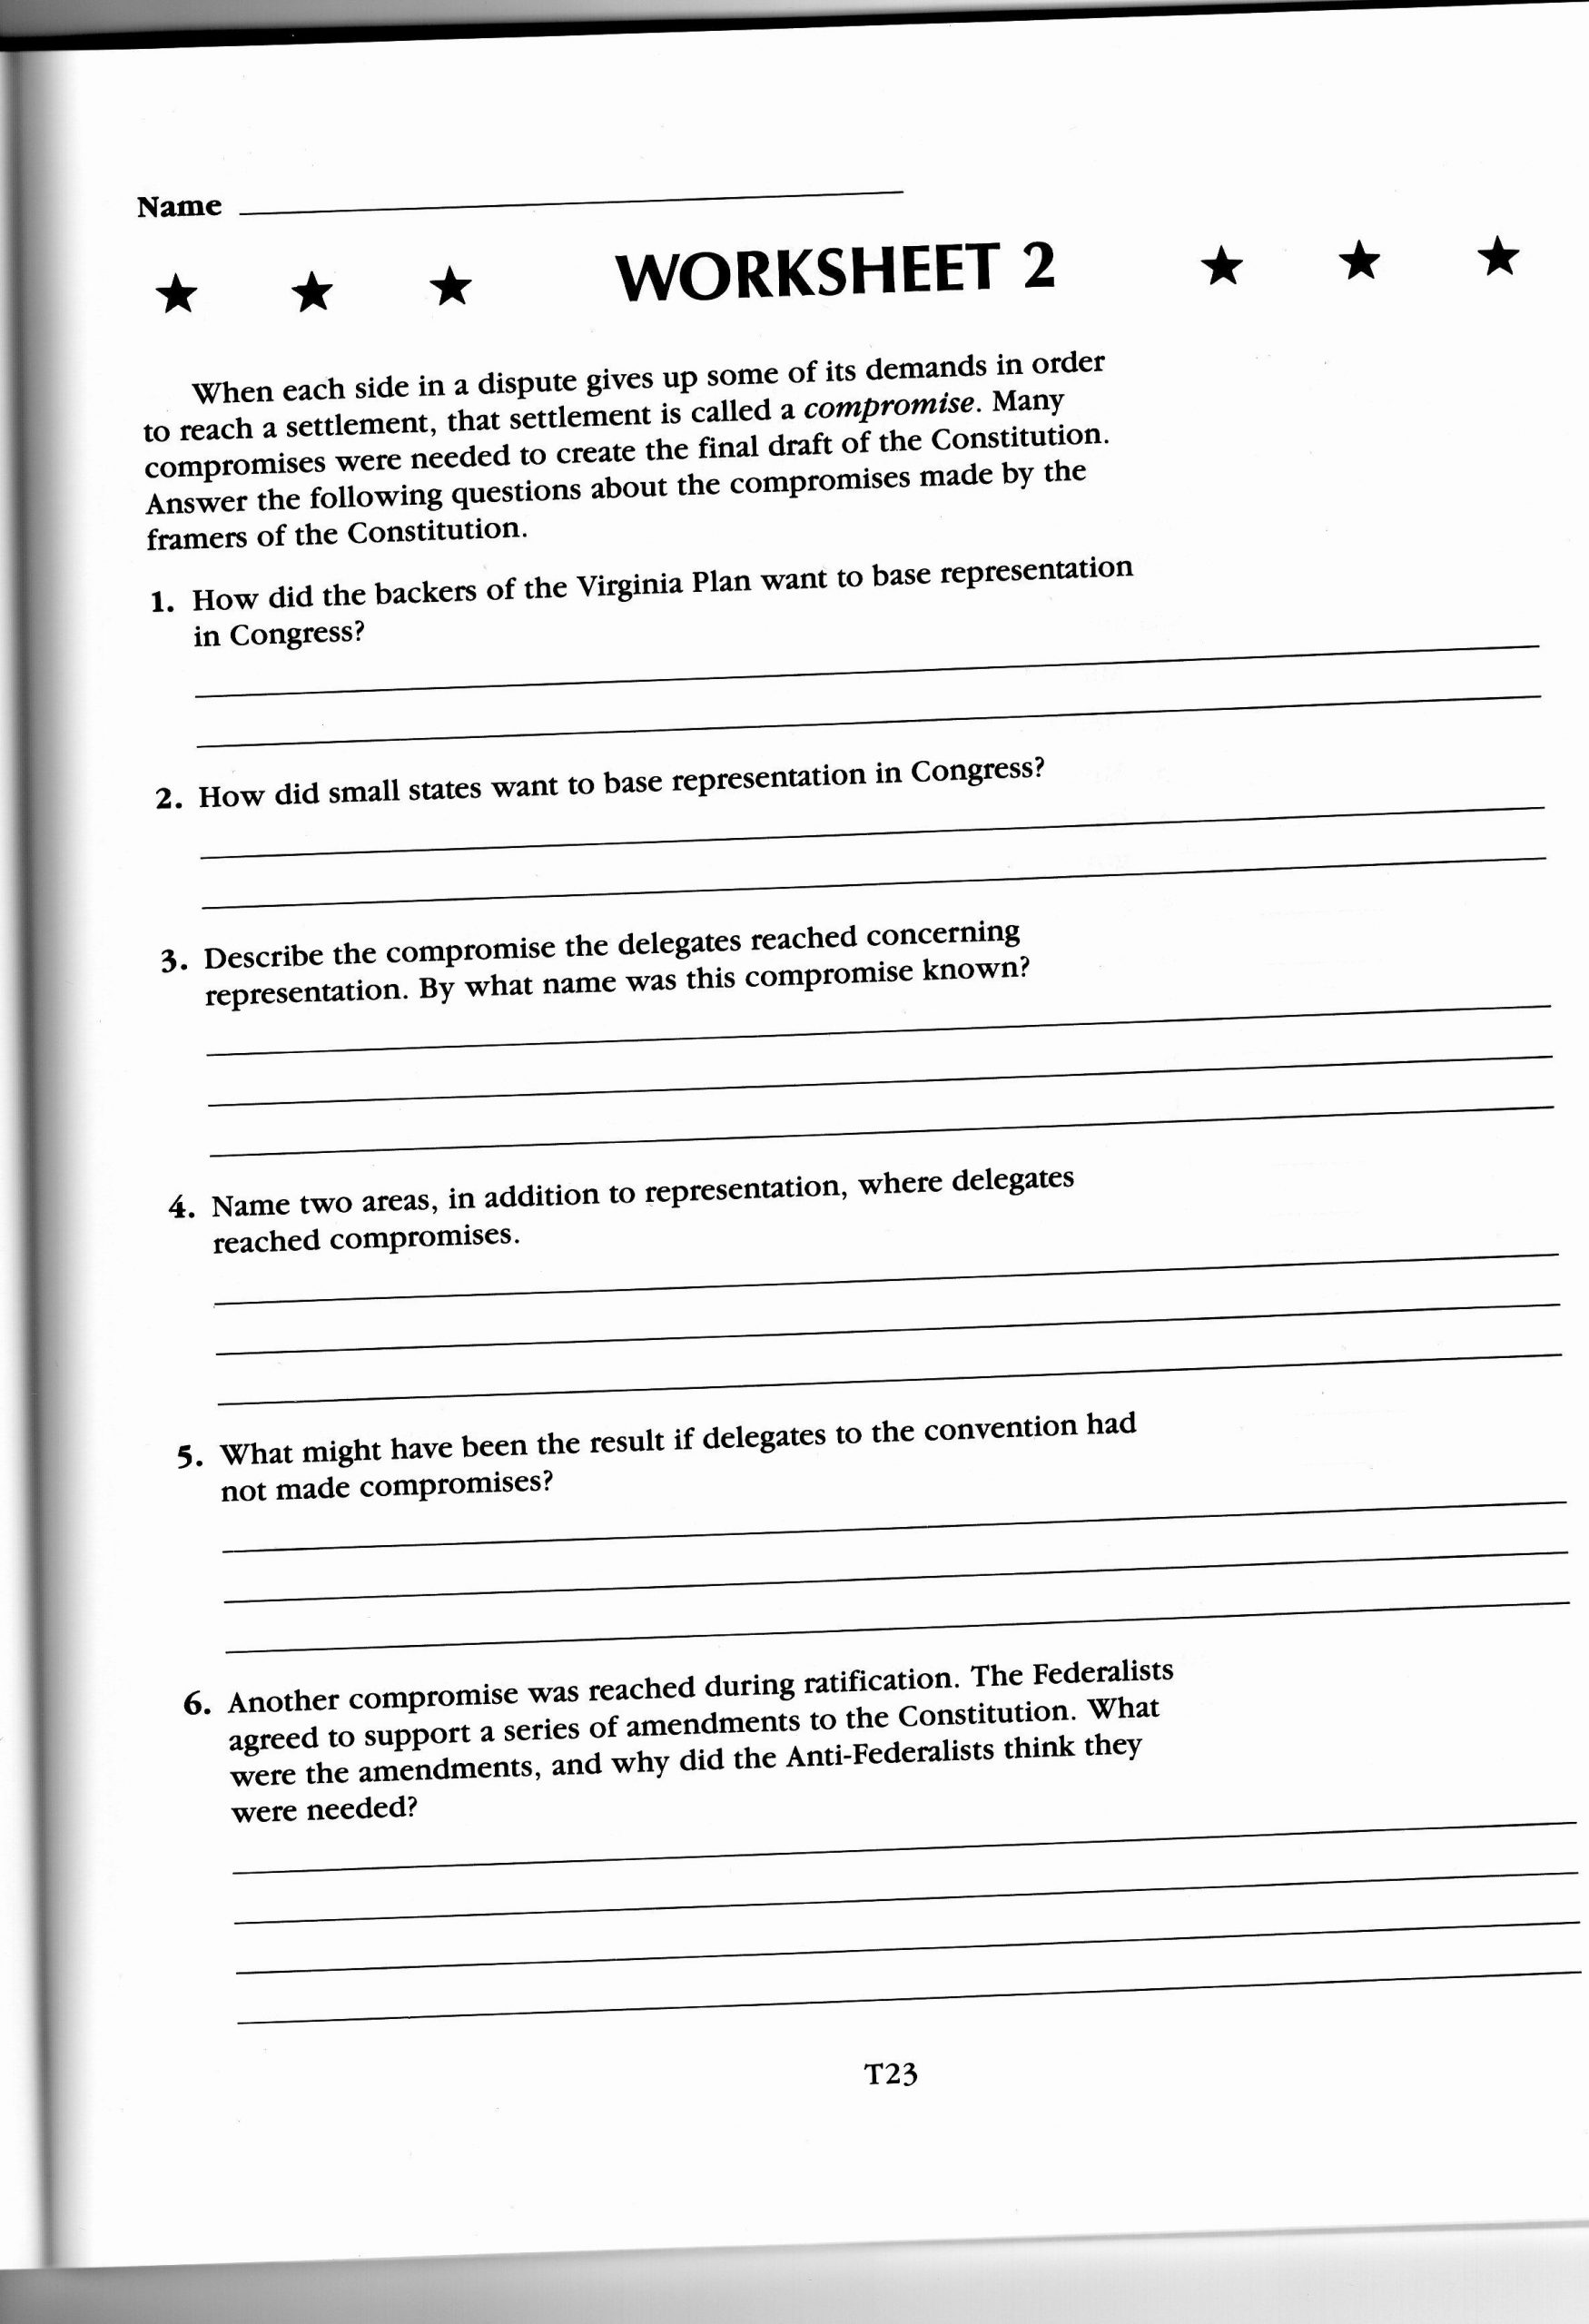 Ratifying the Constitution Worksheet Answers Pin On Customize Design Worksheet Line